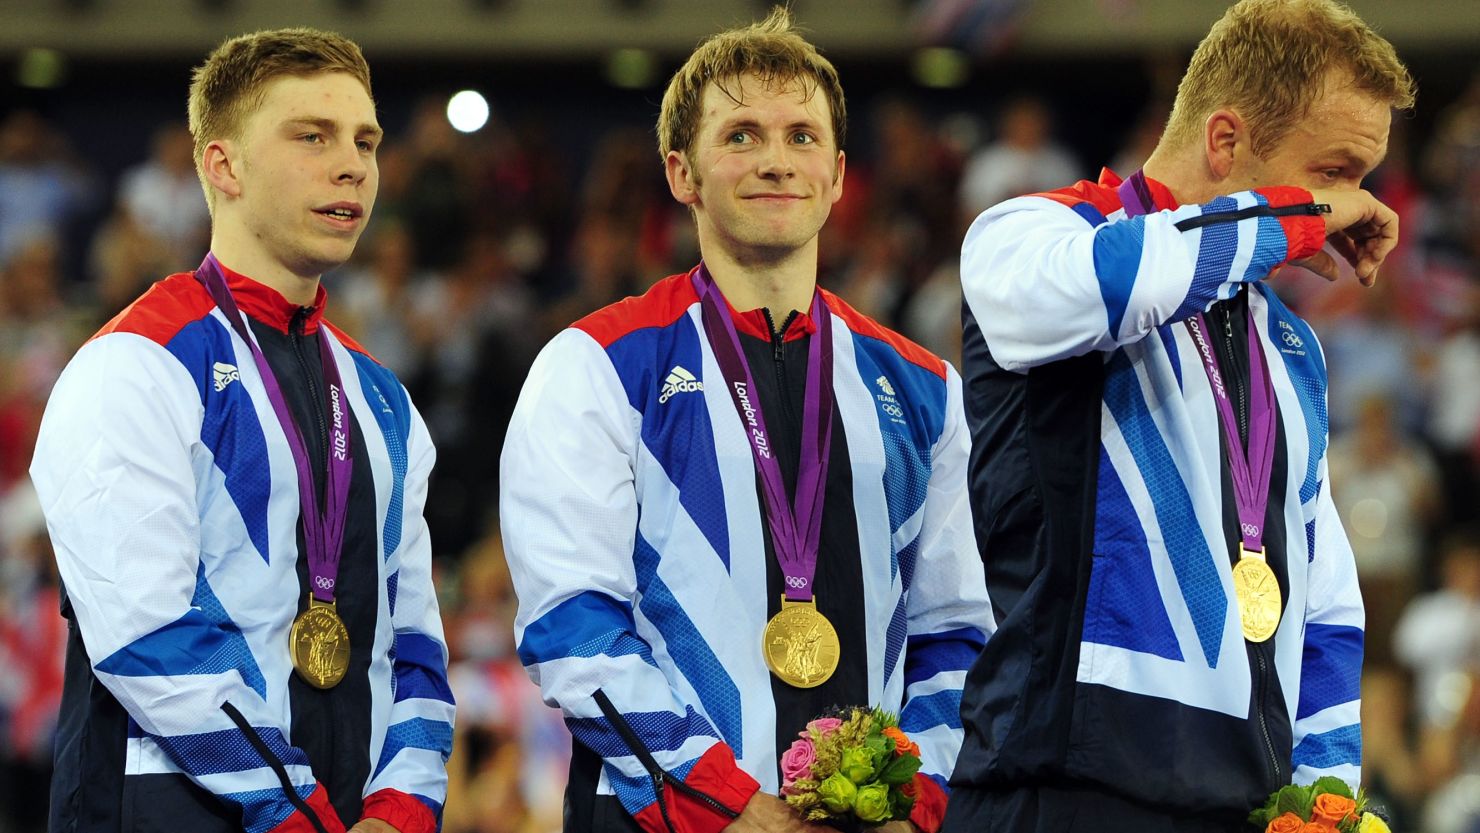 Chris Hoy wipes away a tear as he shares the podium with teammates Philip Hindes and Jason Kenny.  